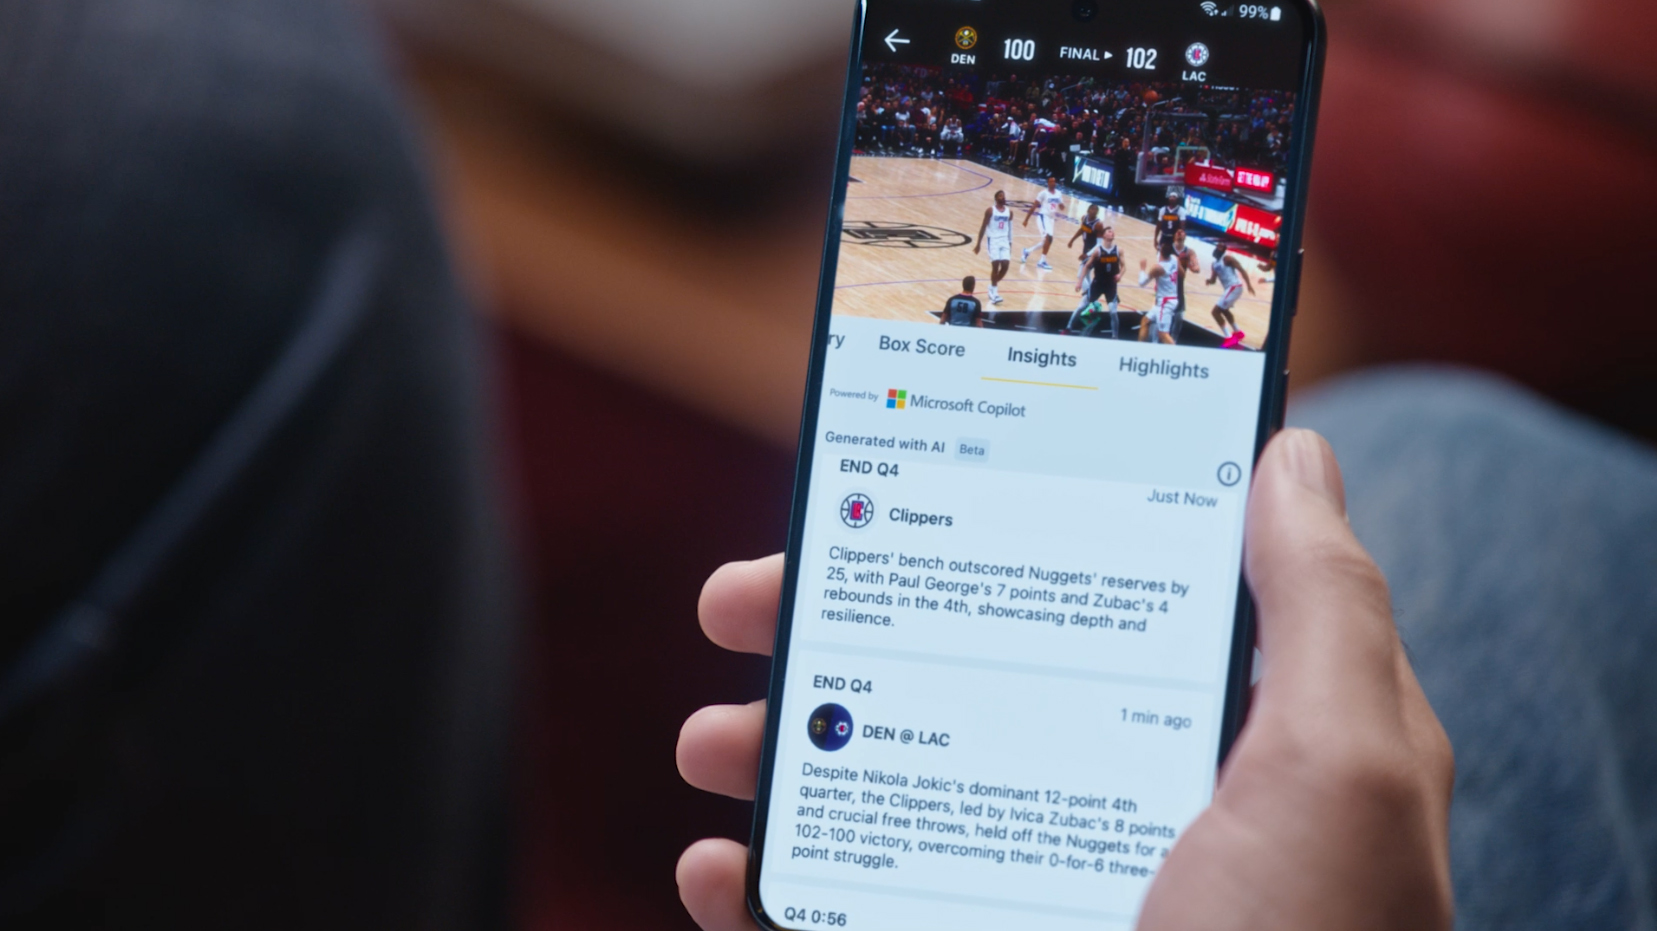 Close-up of a person's hands holding a smartphone displaying a live basketball game score and related news updates on the screen.